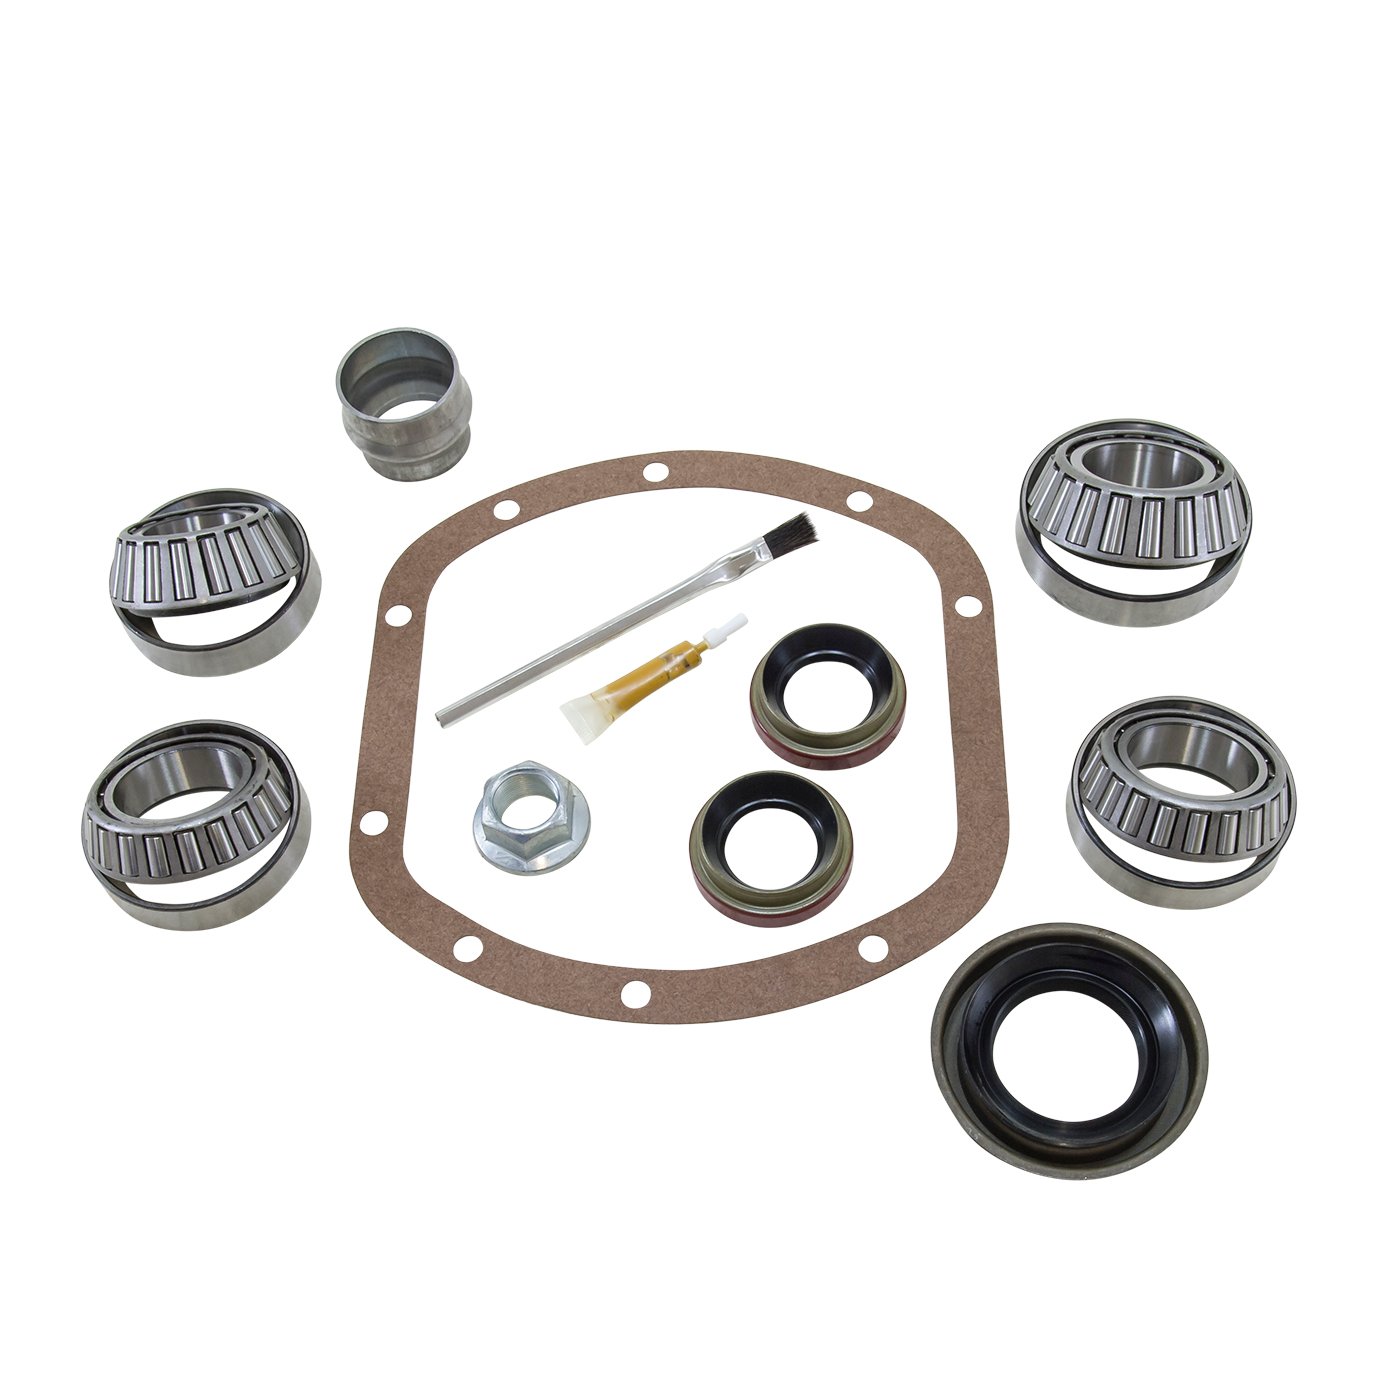 Bearing Installation Kit For Dana 30 Short Pinion Differential